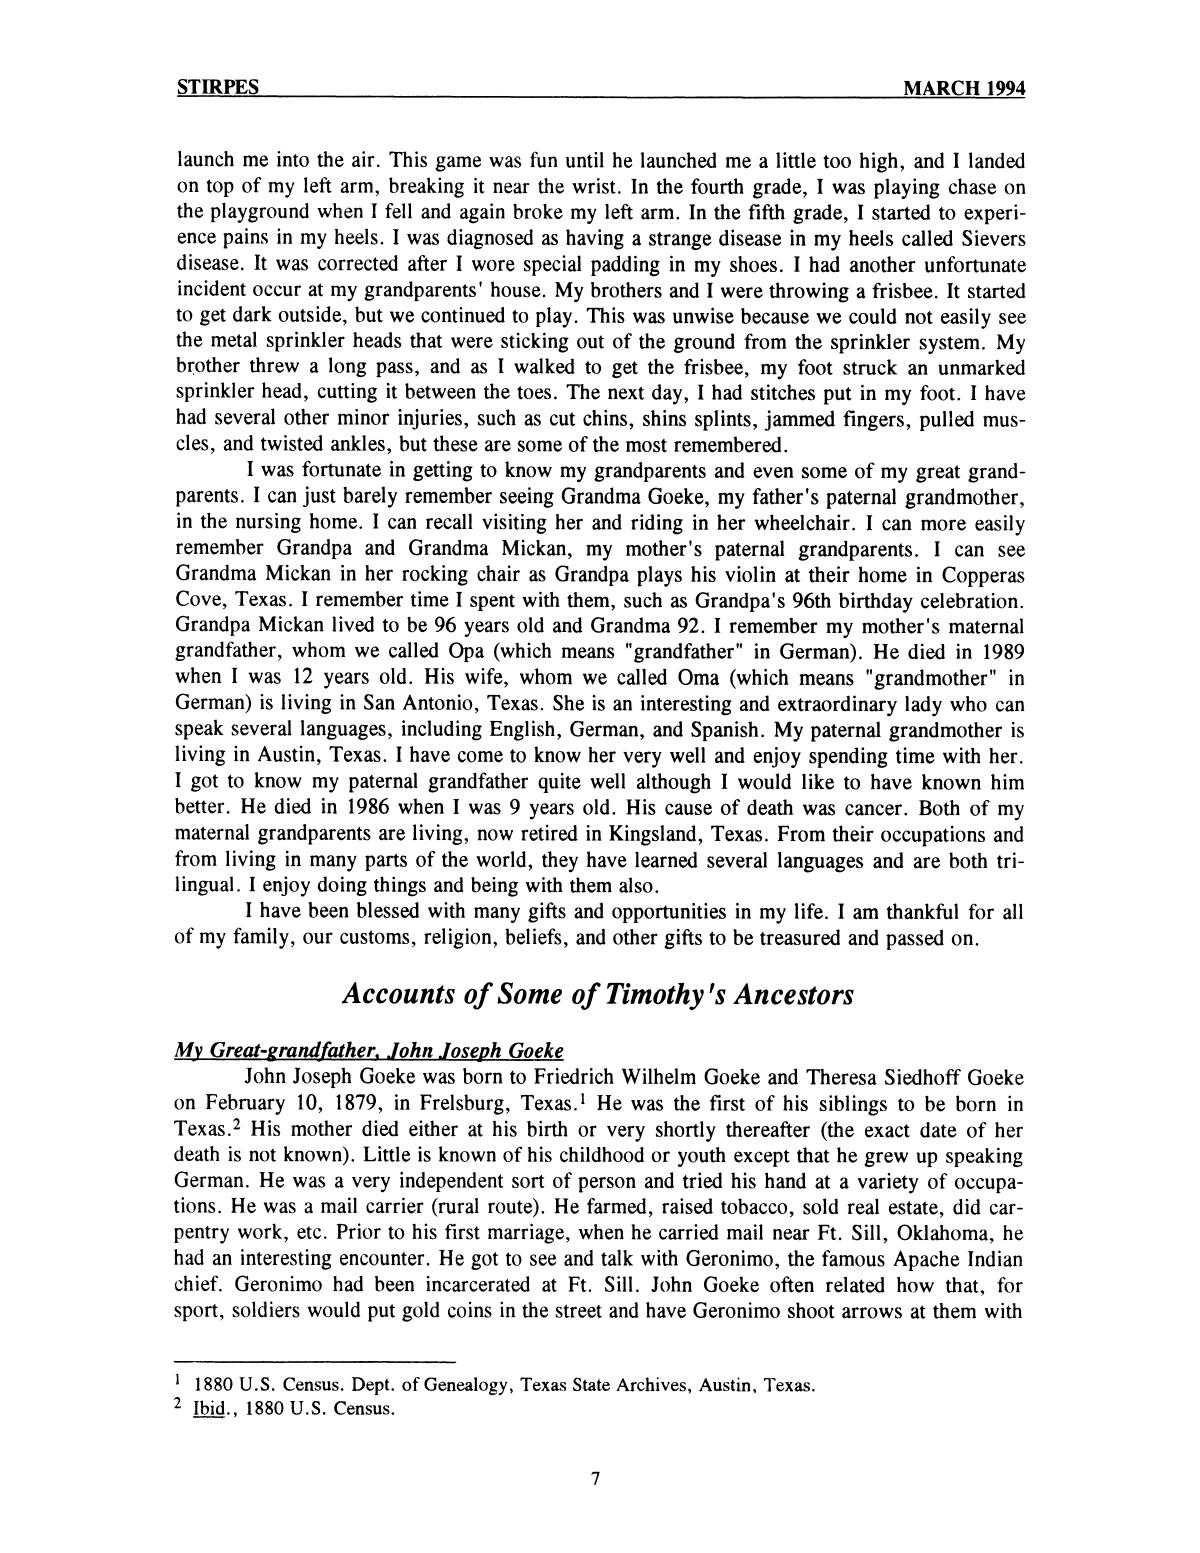 Stirpes, Volume 34, Number 1, March 1994
                                                
                                                    7
                                                